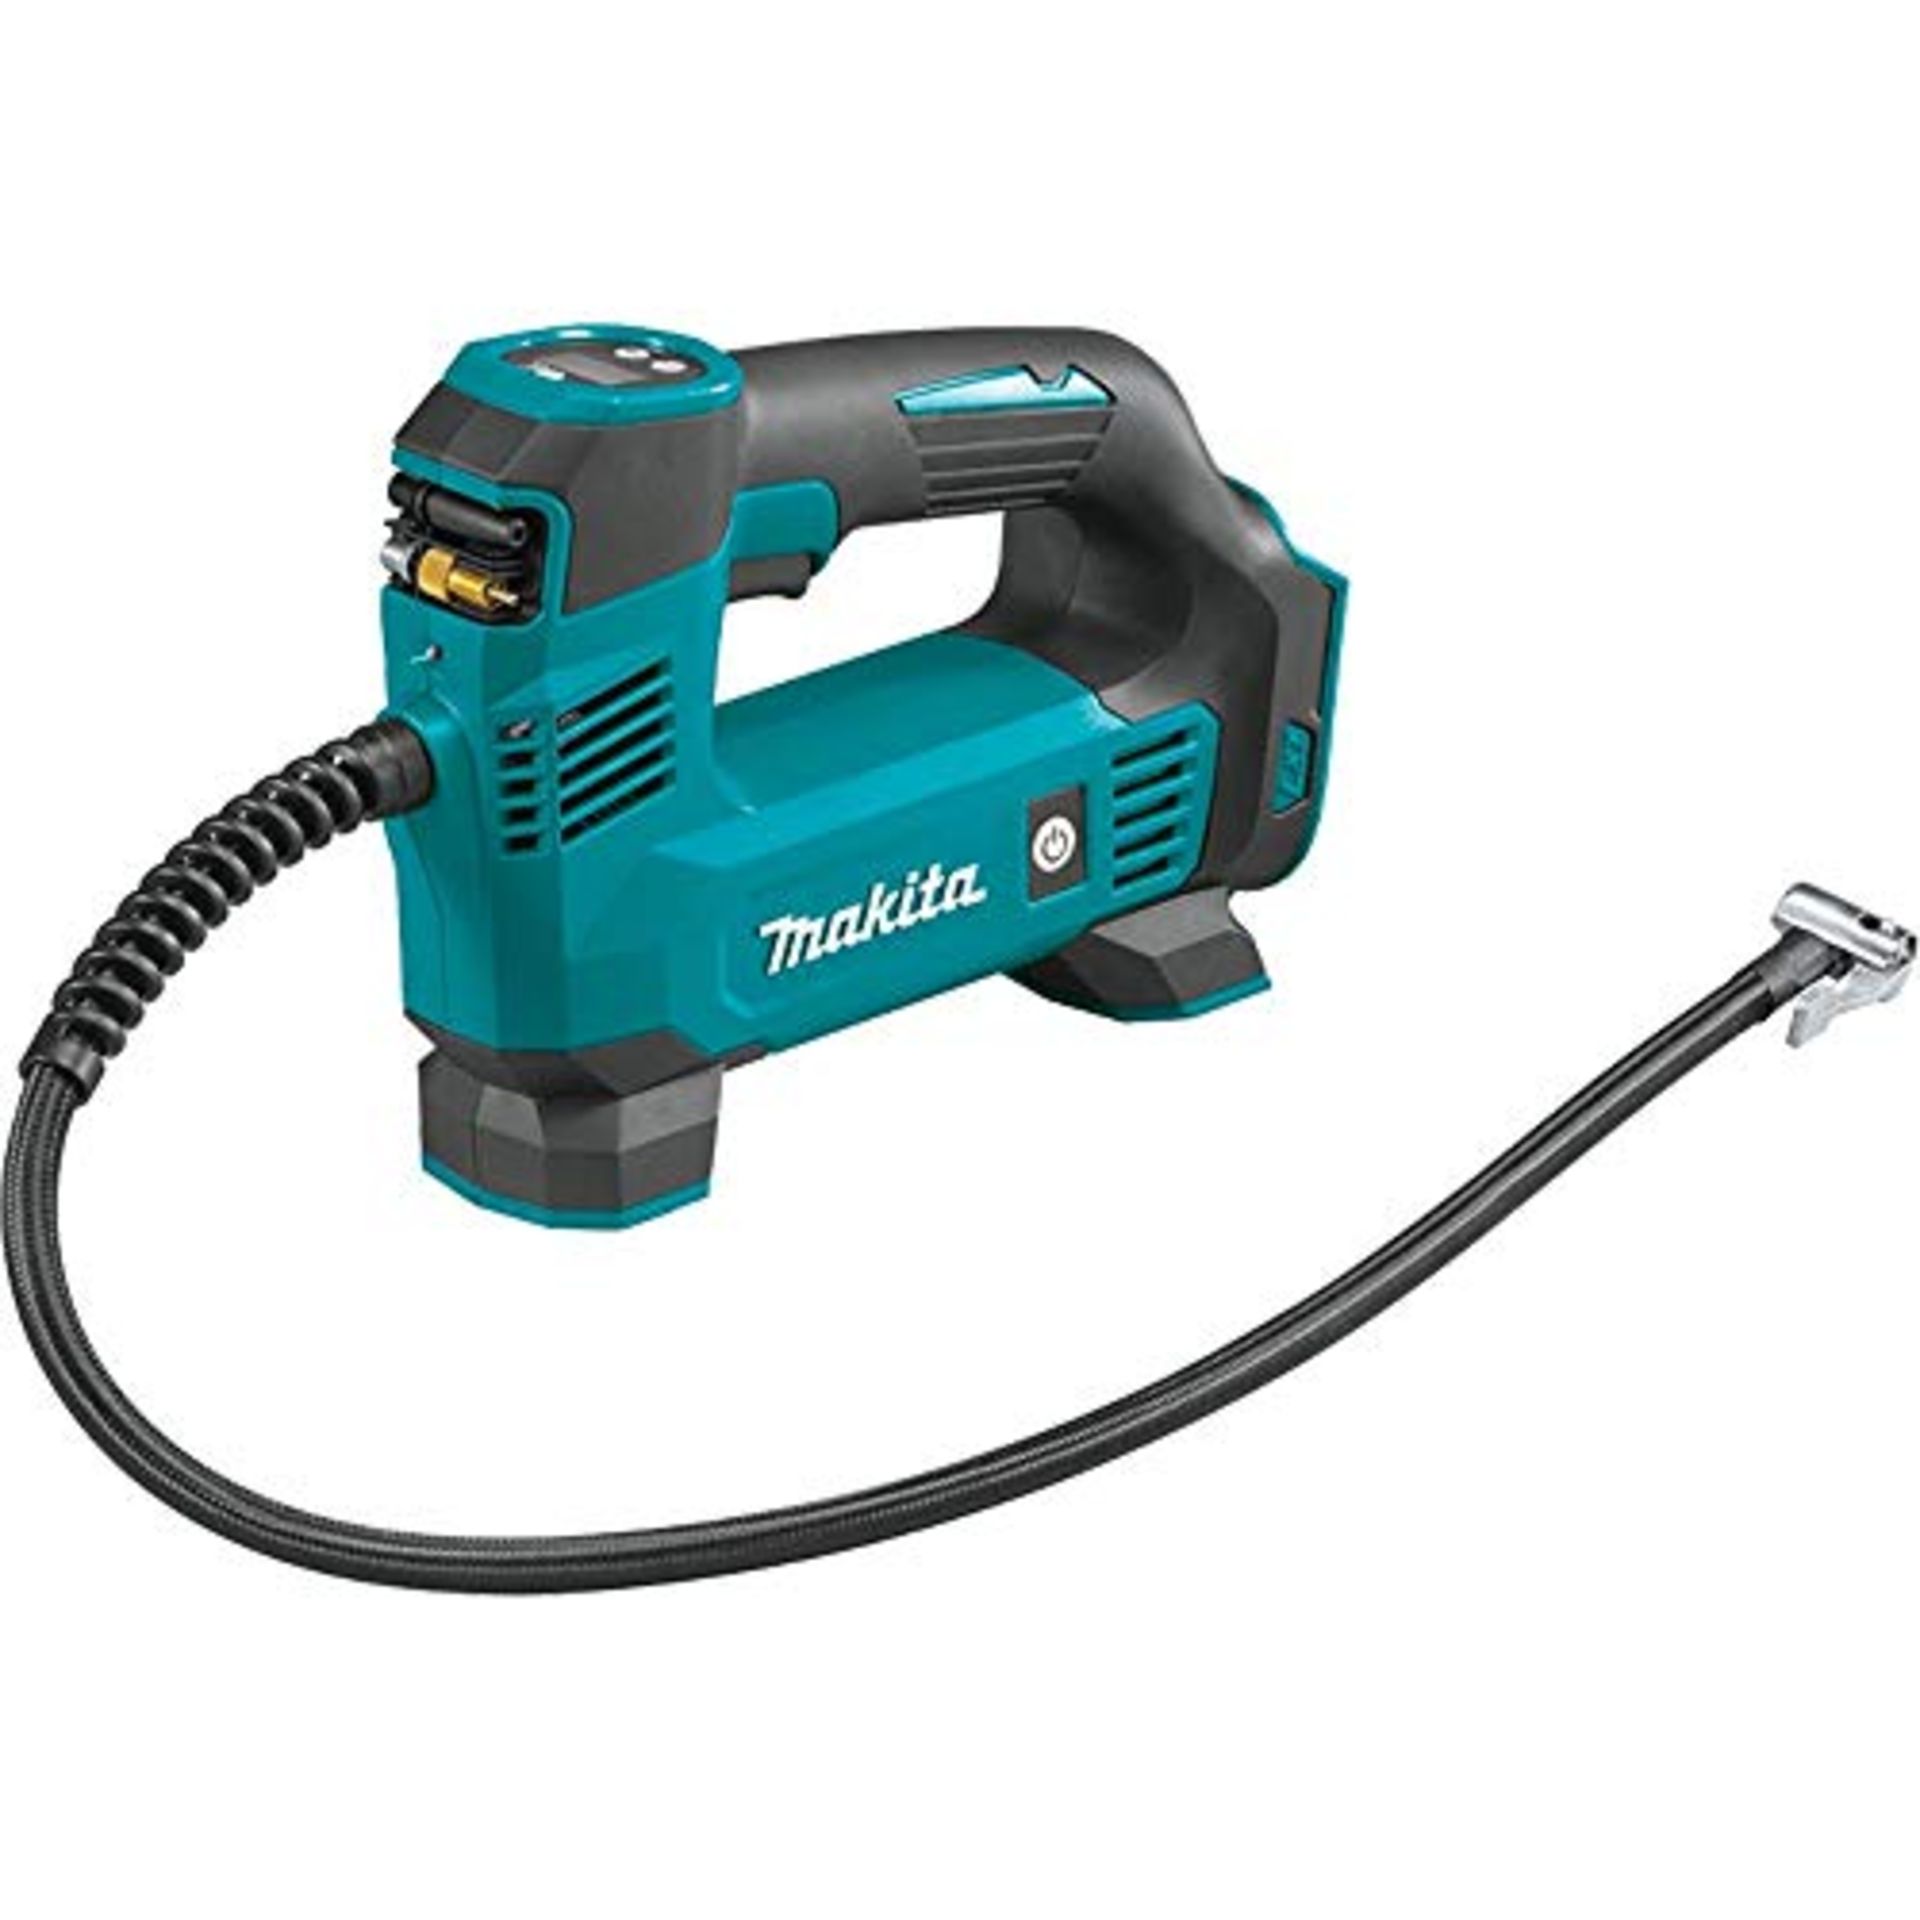 RRP £93.00 Makita DMP180Z 18V Li-ion LXT Inflator - Batteries and Charger Not Included, Blue/Silv